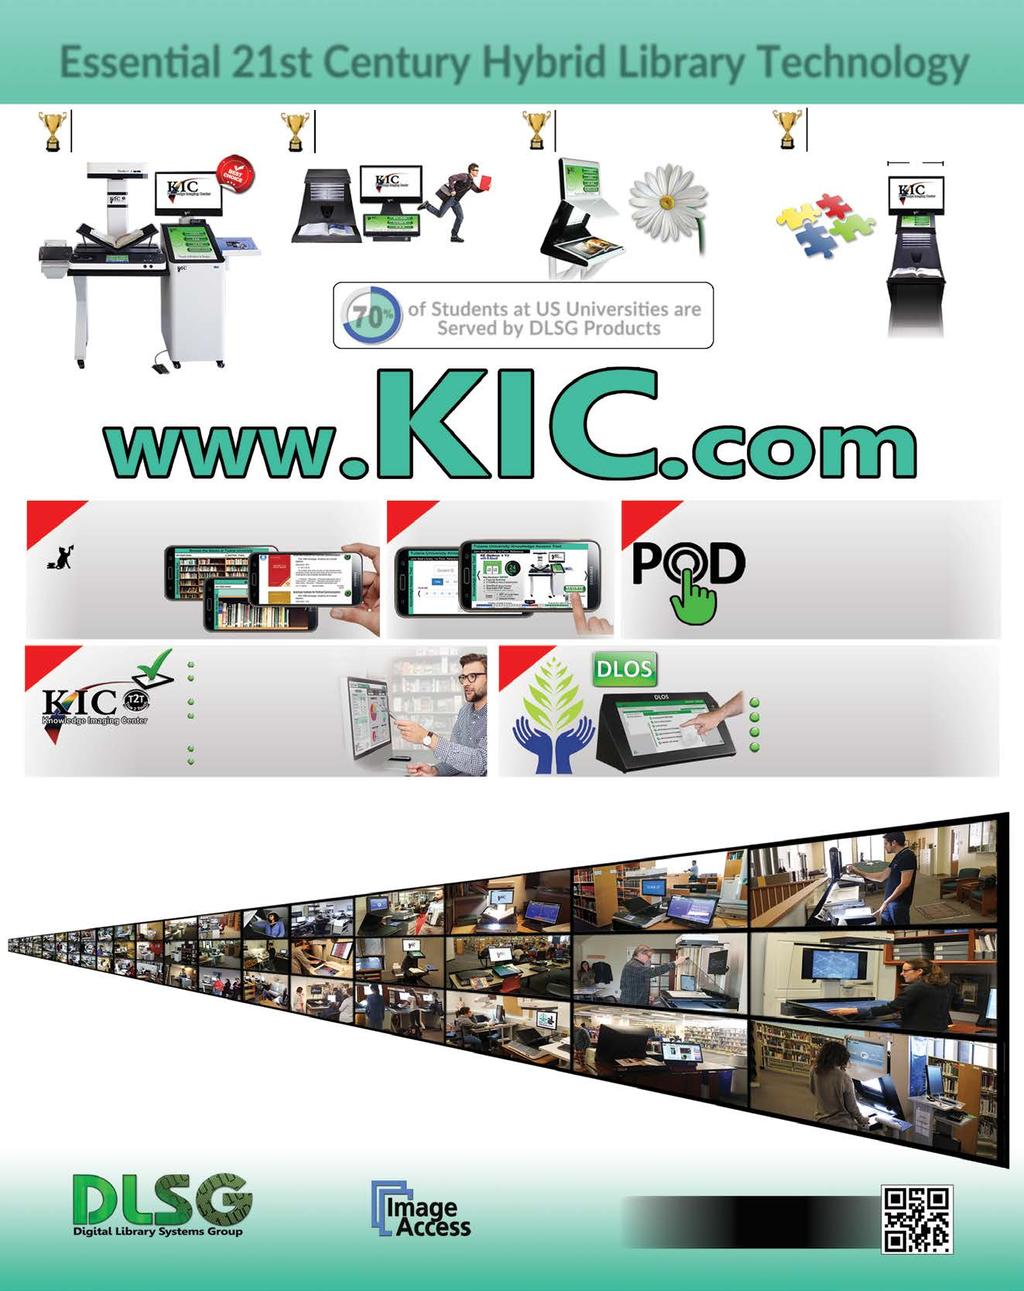 LARGEST SCAN AREA Essennal 21st Century Hybrid Library Technology The Best All Around KIC Bookeye 4 V2 & V3 Models The Fastest KIC Click Mini Tabletop Touch & View The Most Beautiful KIC Click Slim